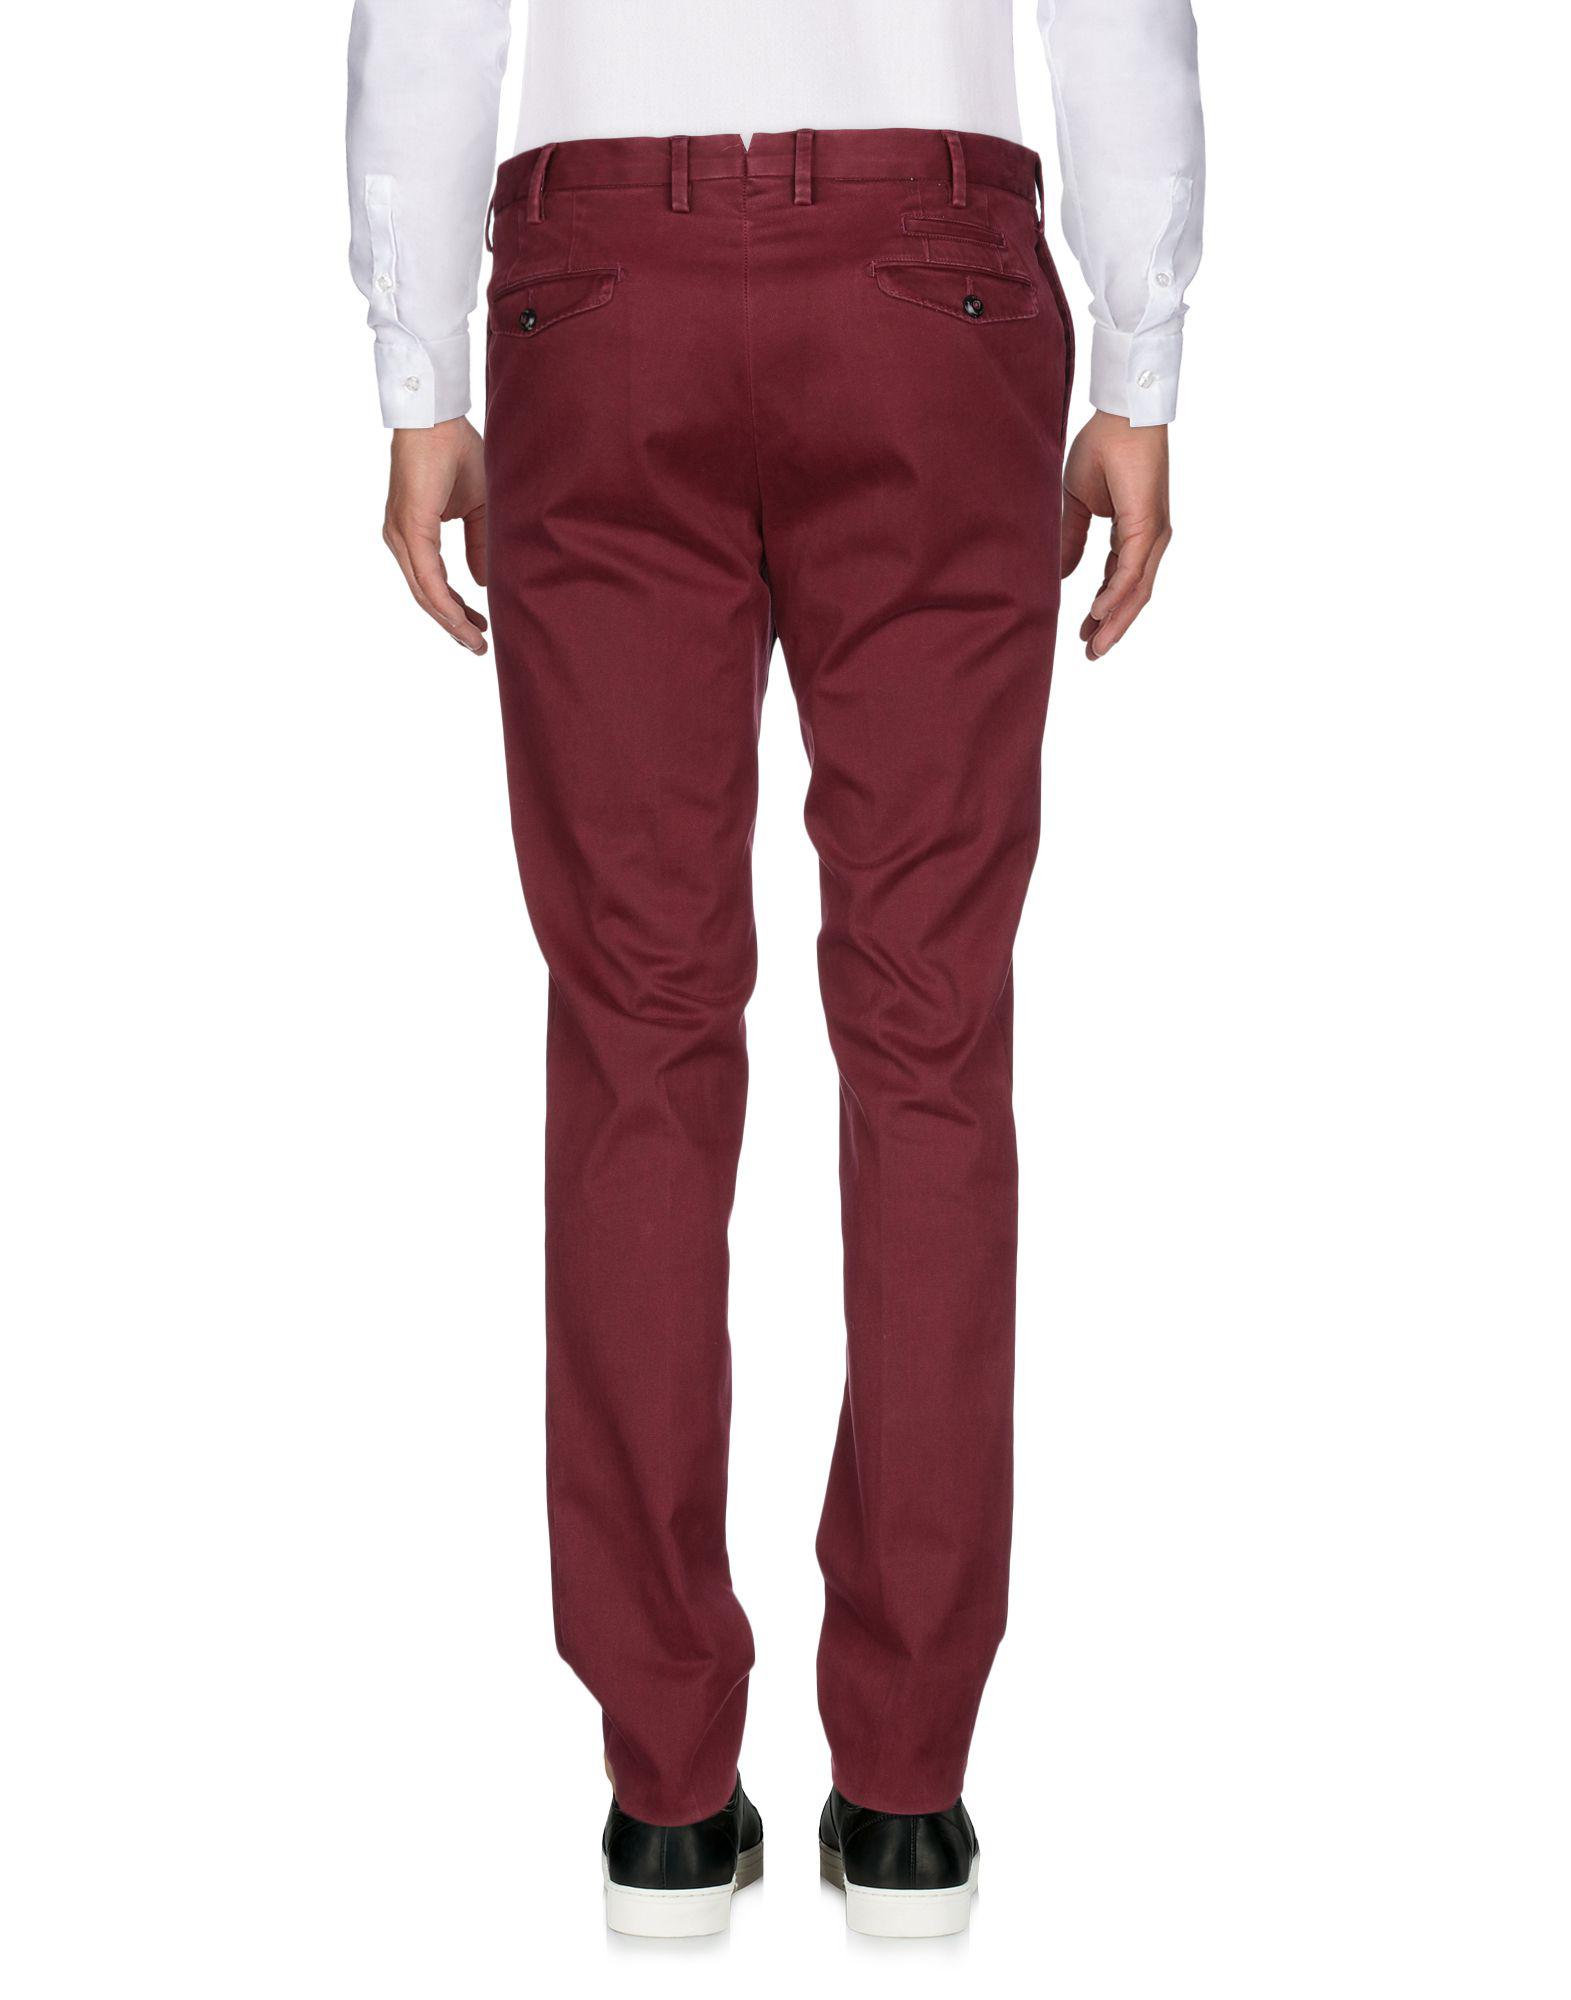 PT01 Cotton Casual Pants in Maroon (Red) for Men - Lyst